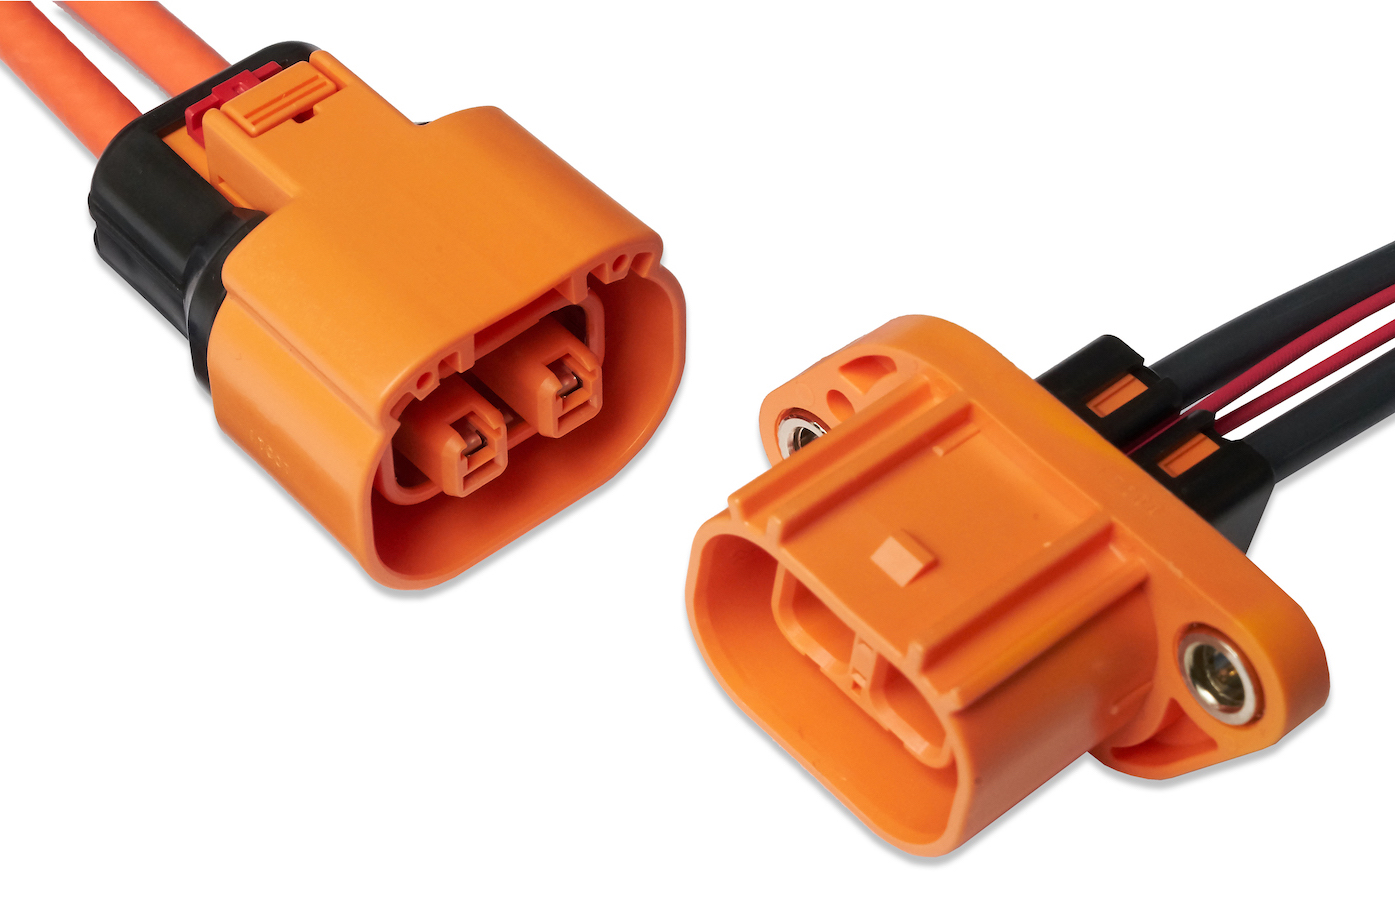 New connector from Hirose - HVH 280 series